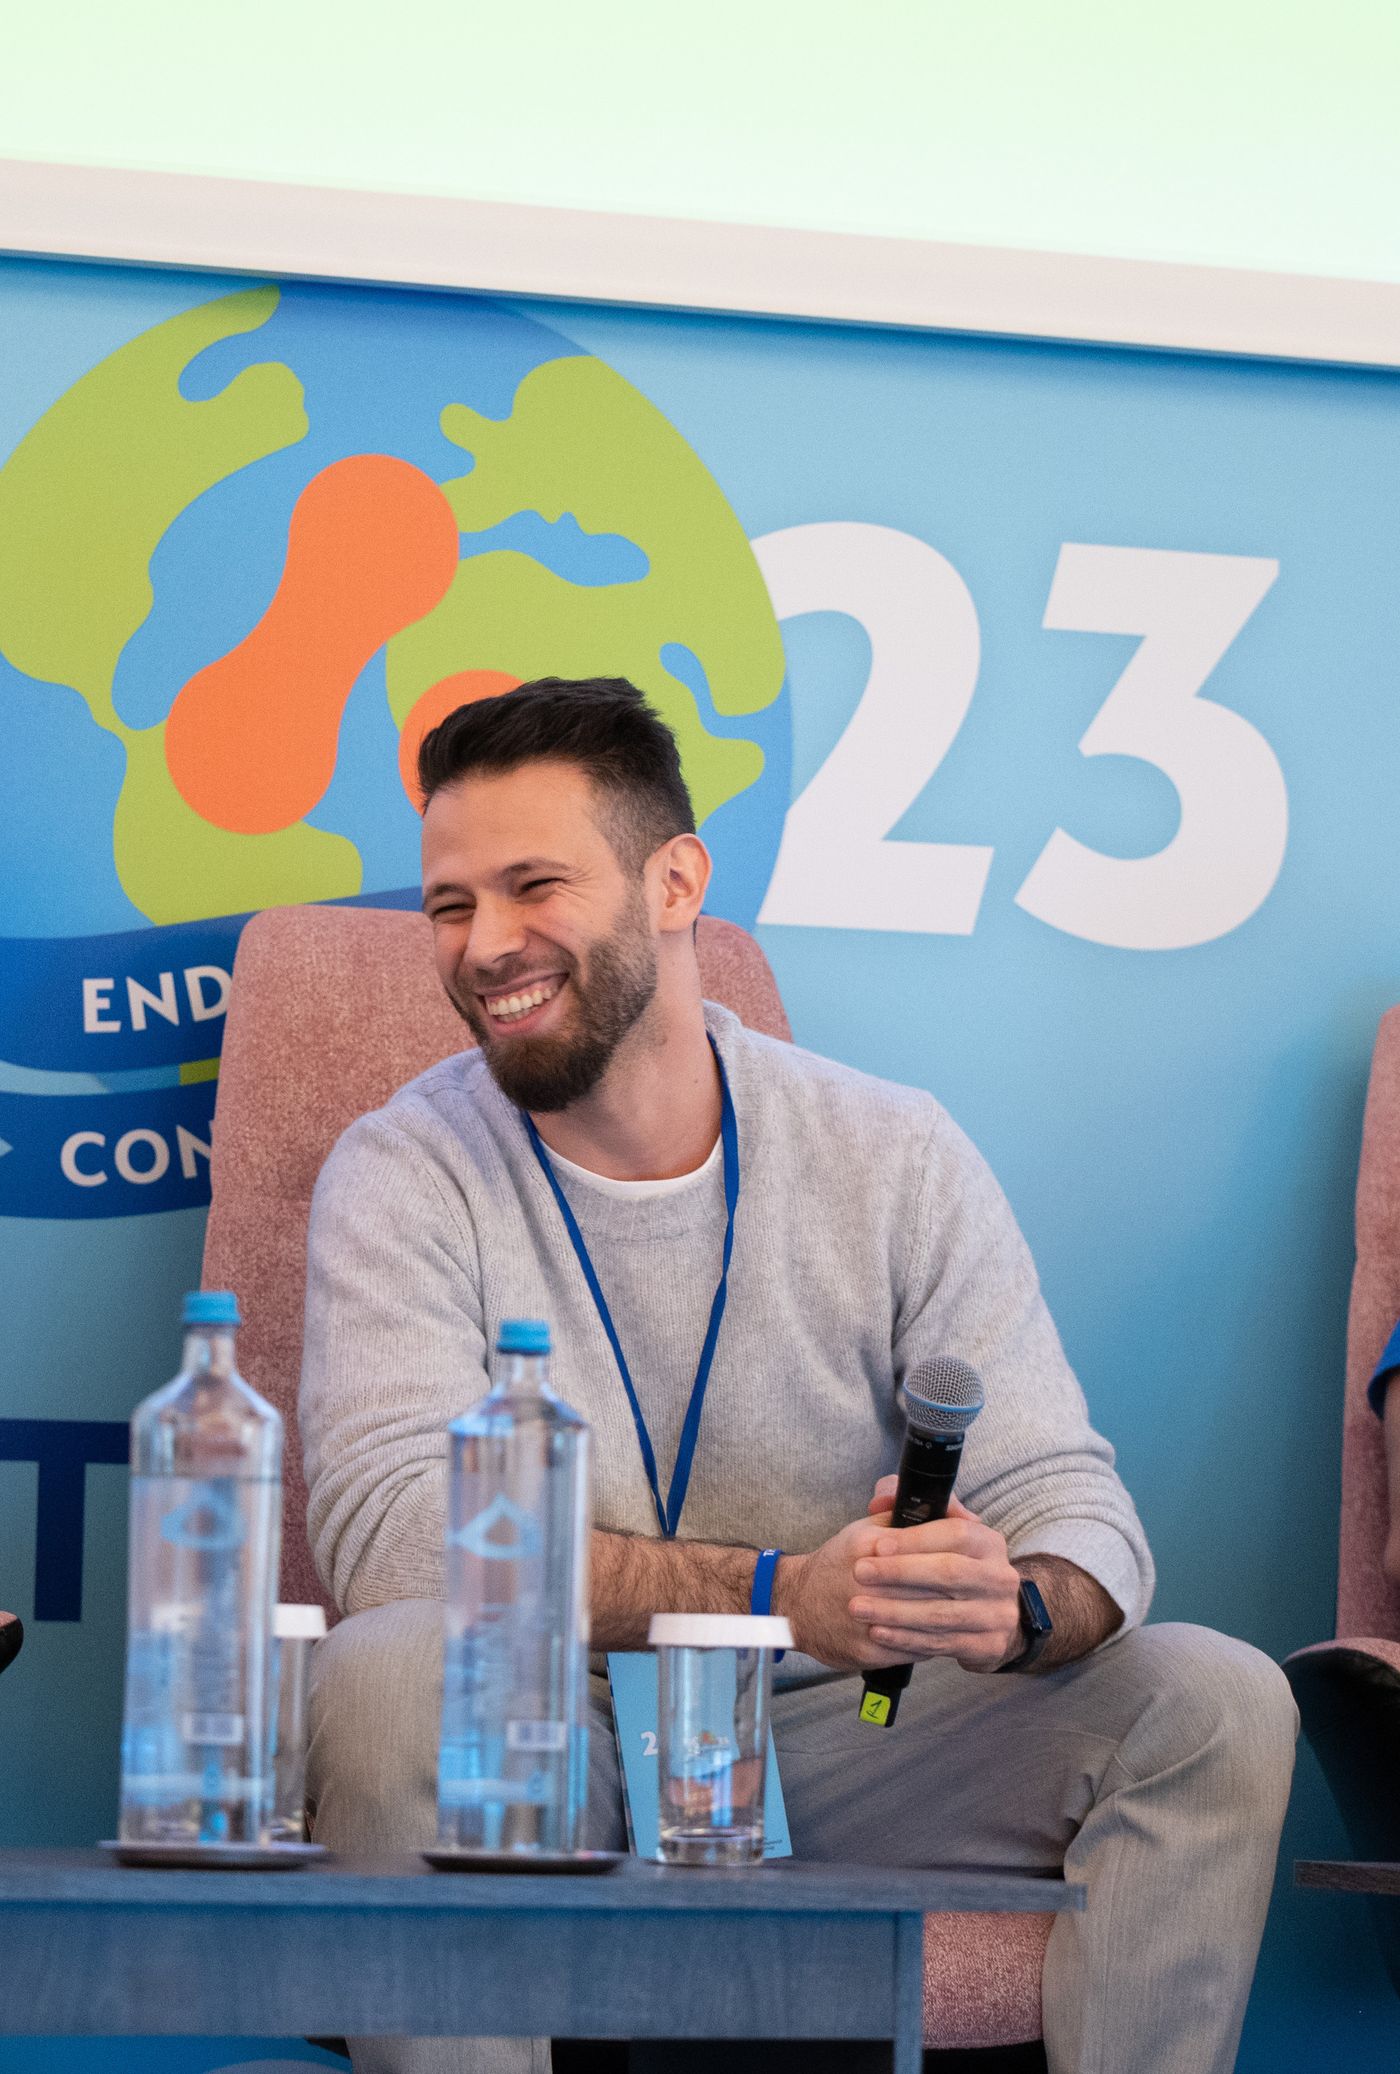 Adil Nasri sitting on a conference stage laughing, holding a microphone